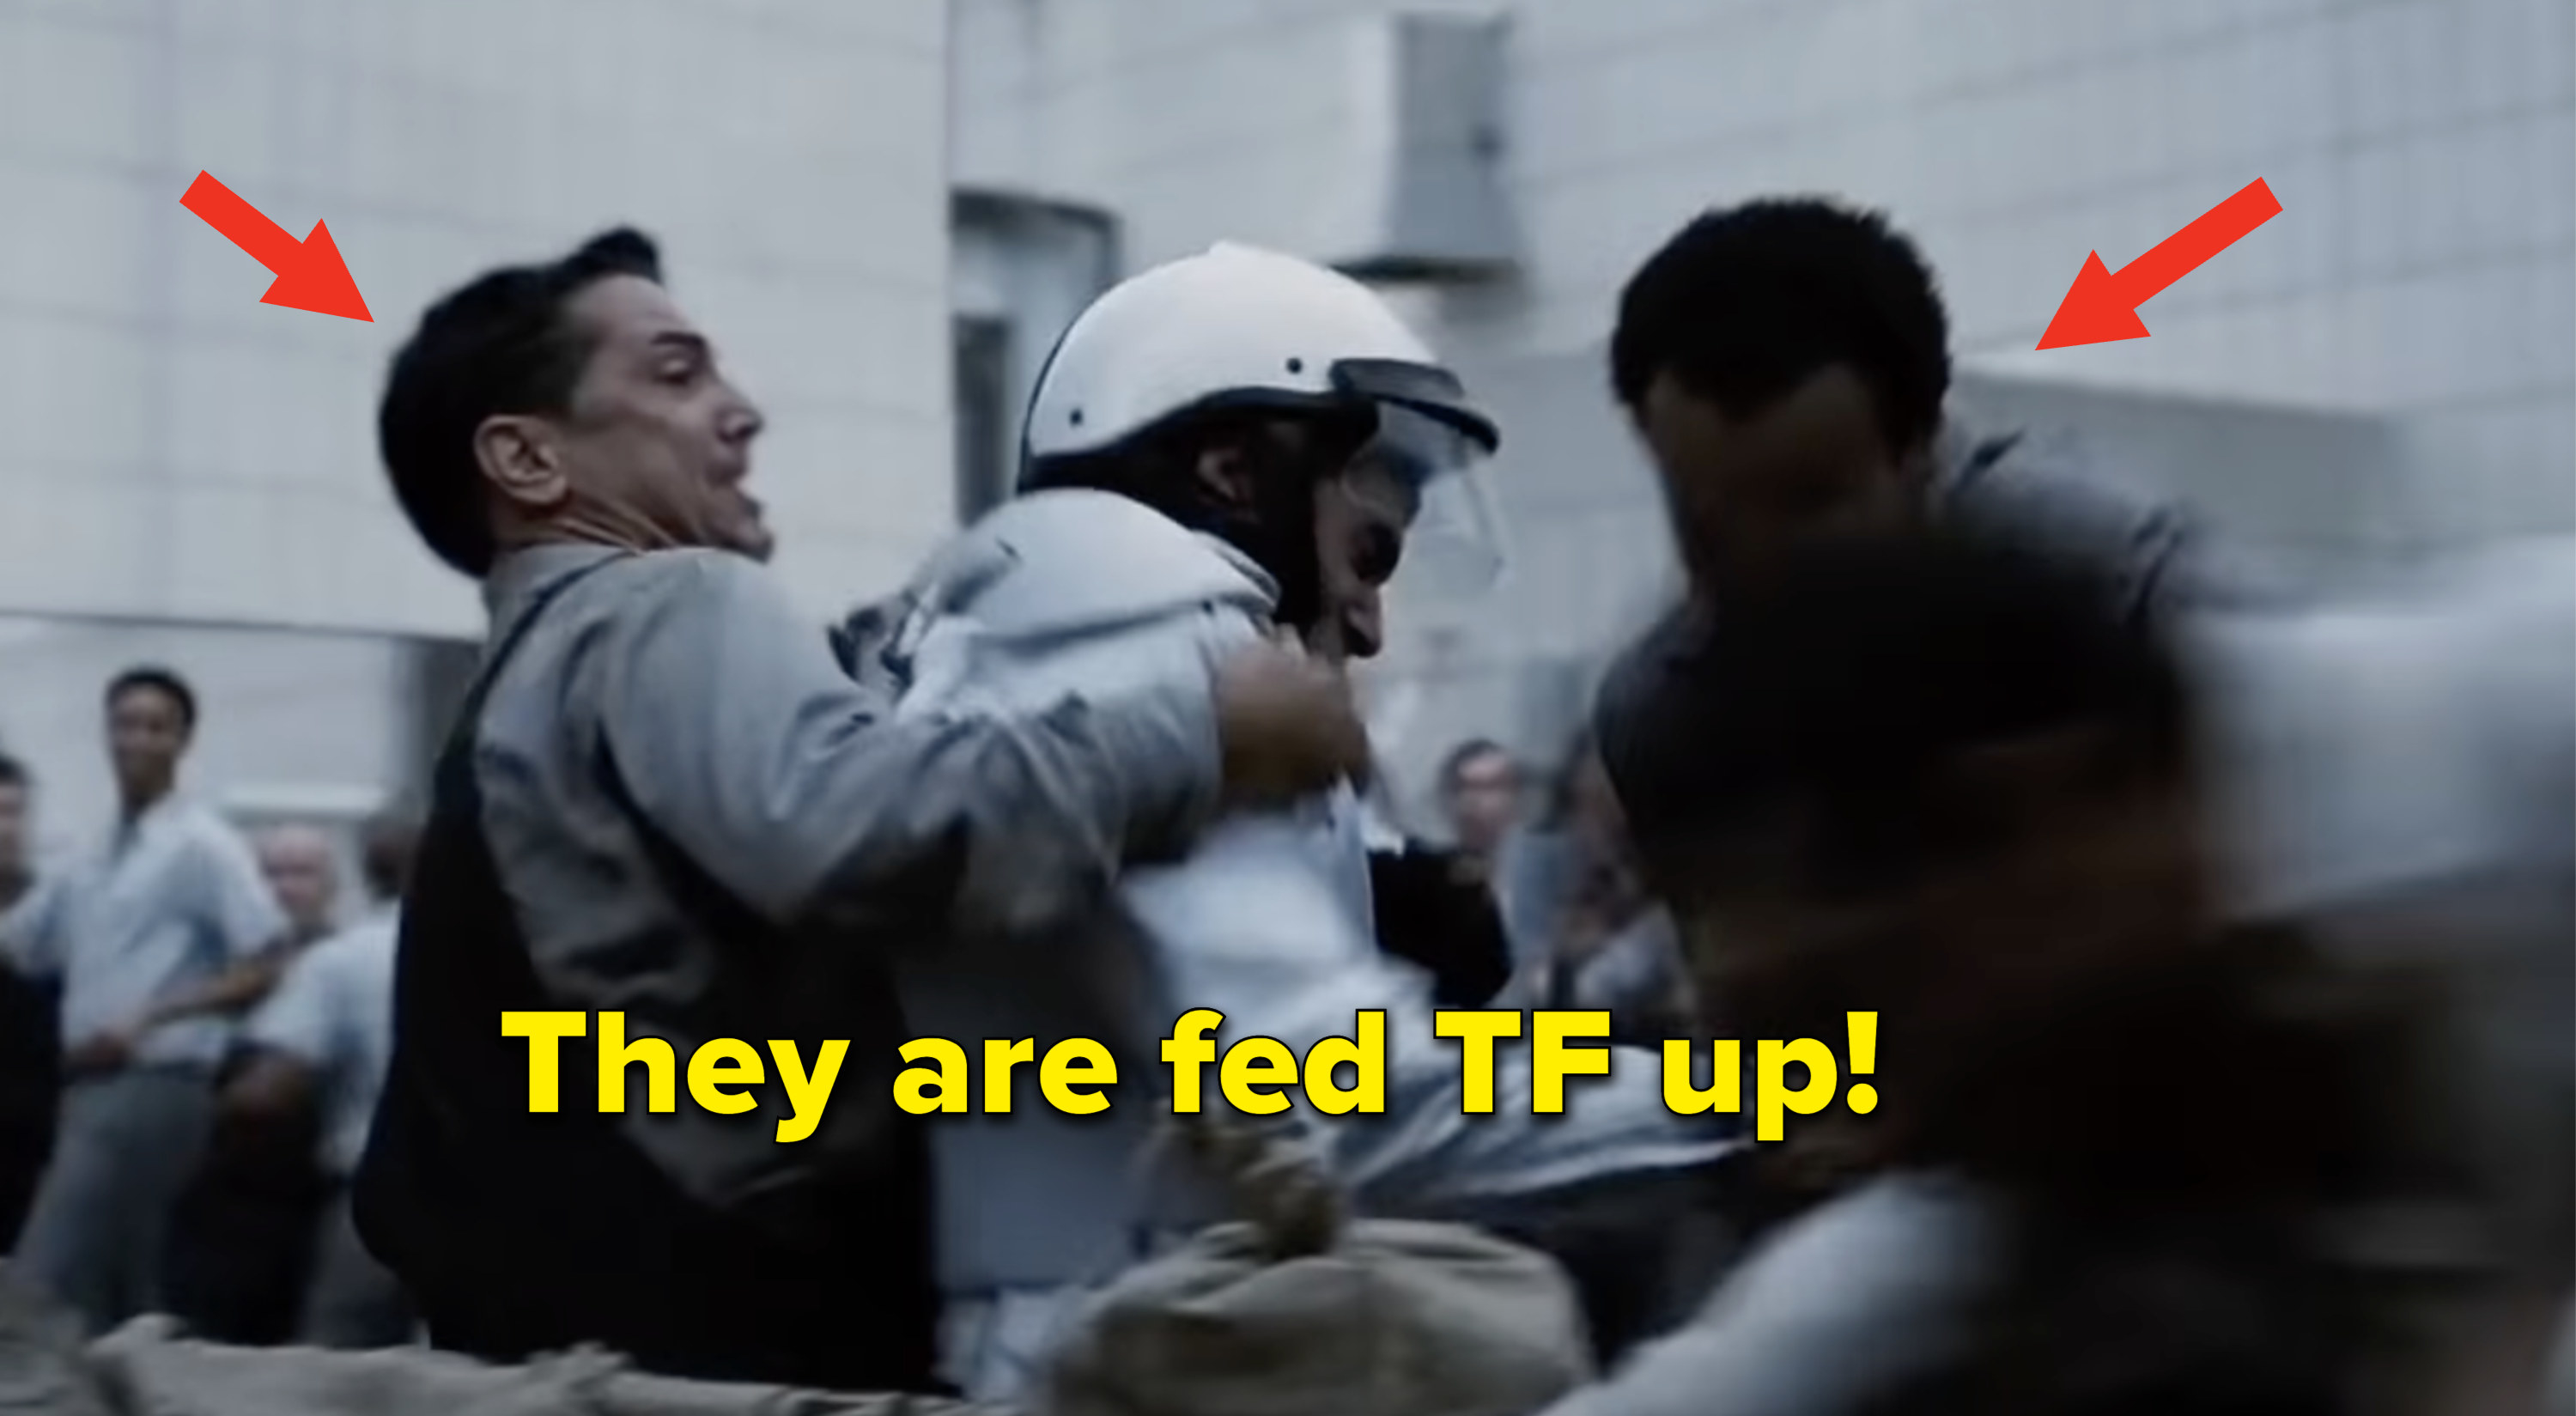 Two protestors fighting against a guard with the caption &quot;They are fed TF up!&quot;